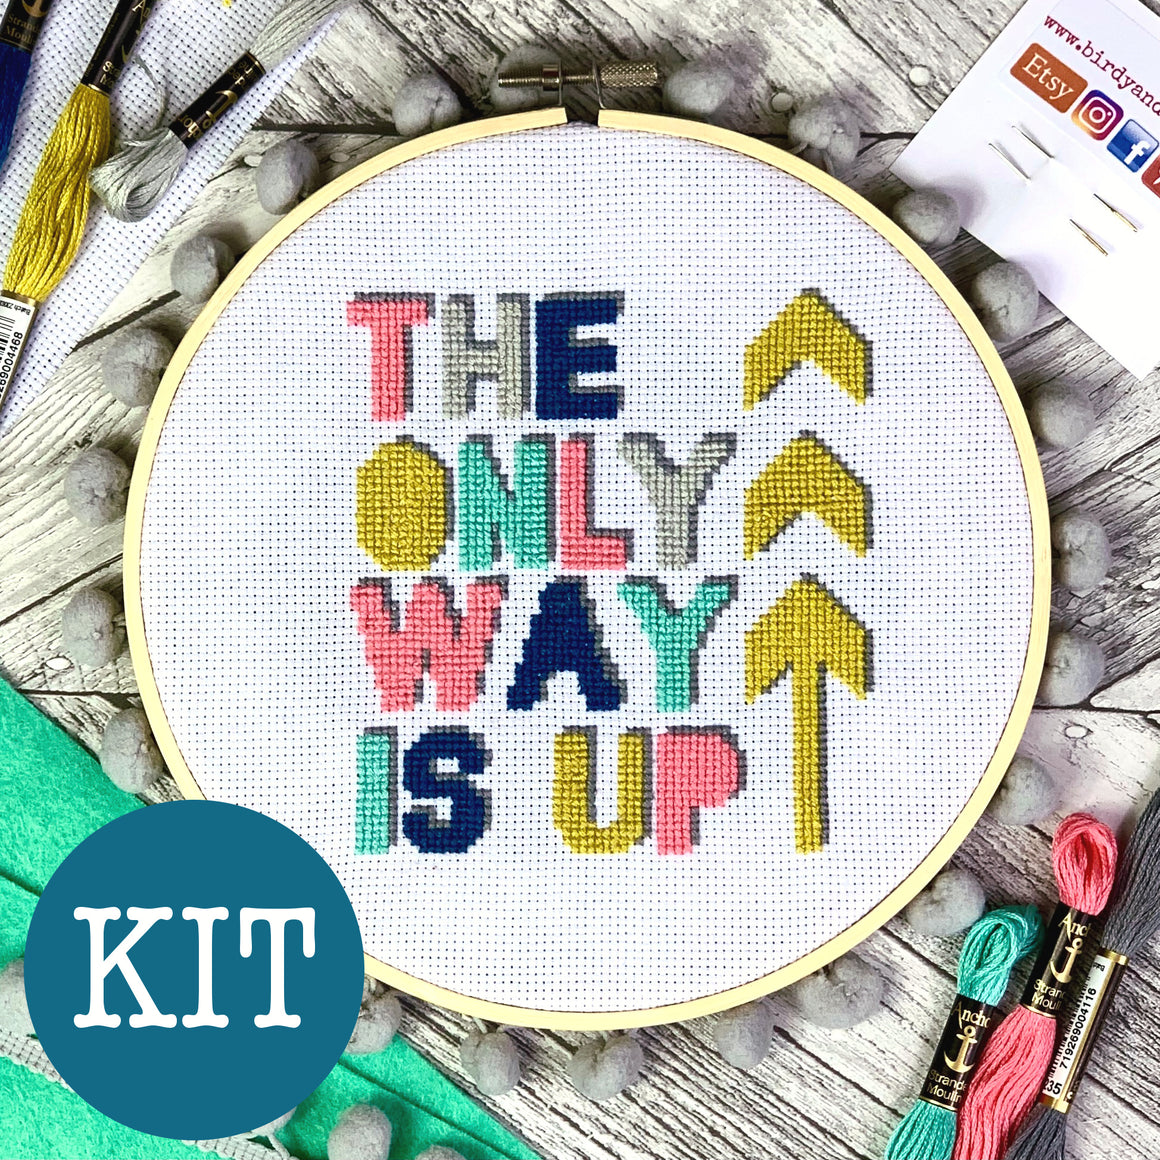 CROSS STITCH KIT - The Only Way Is Up! (complete kit including 8" hoop)